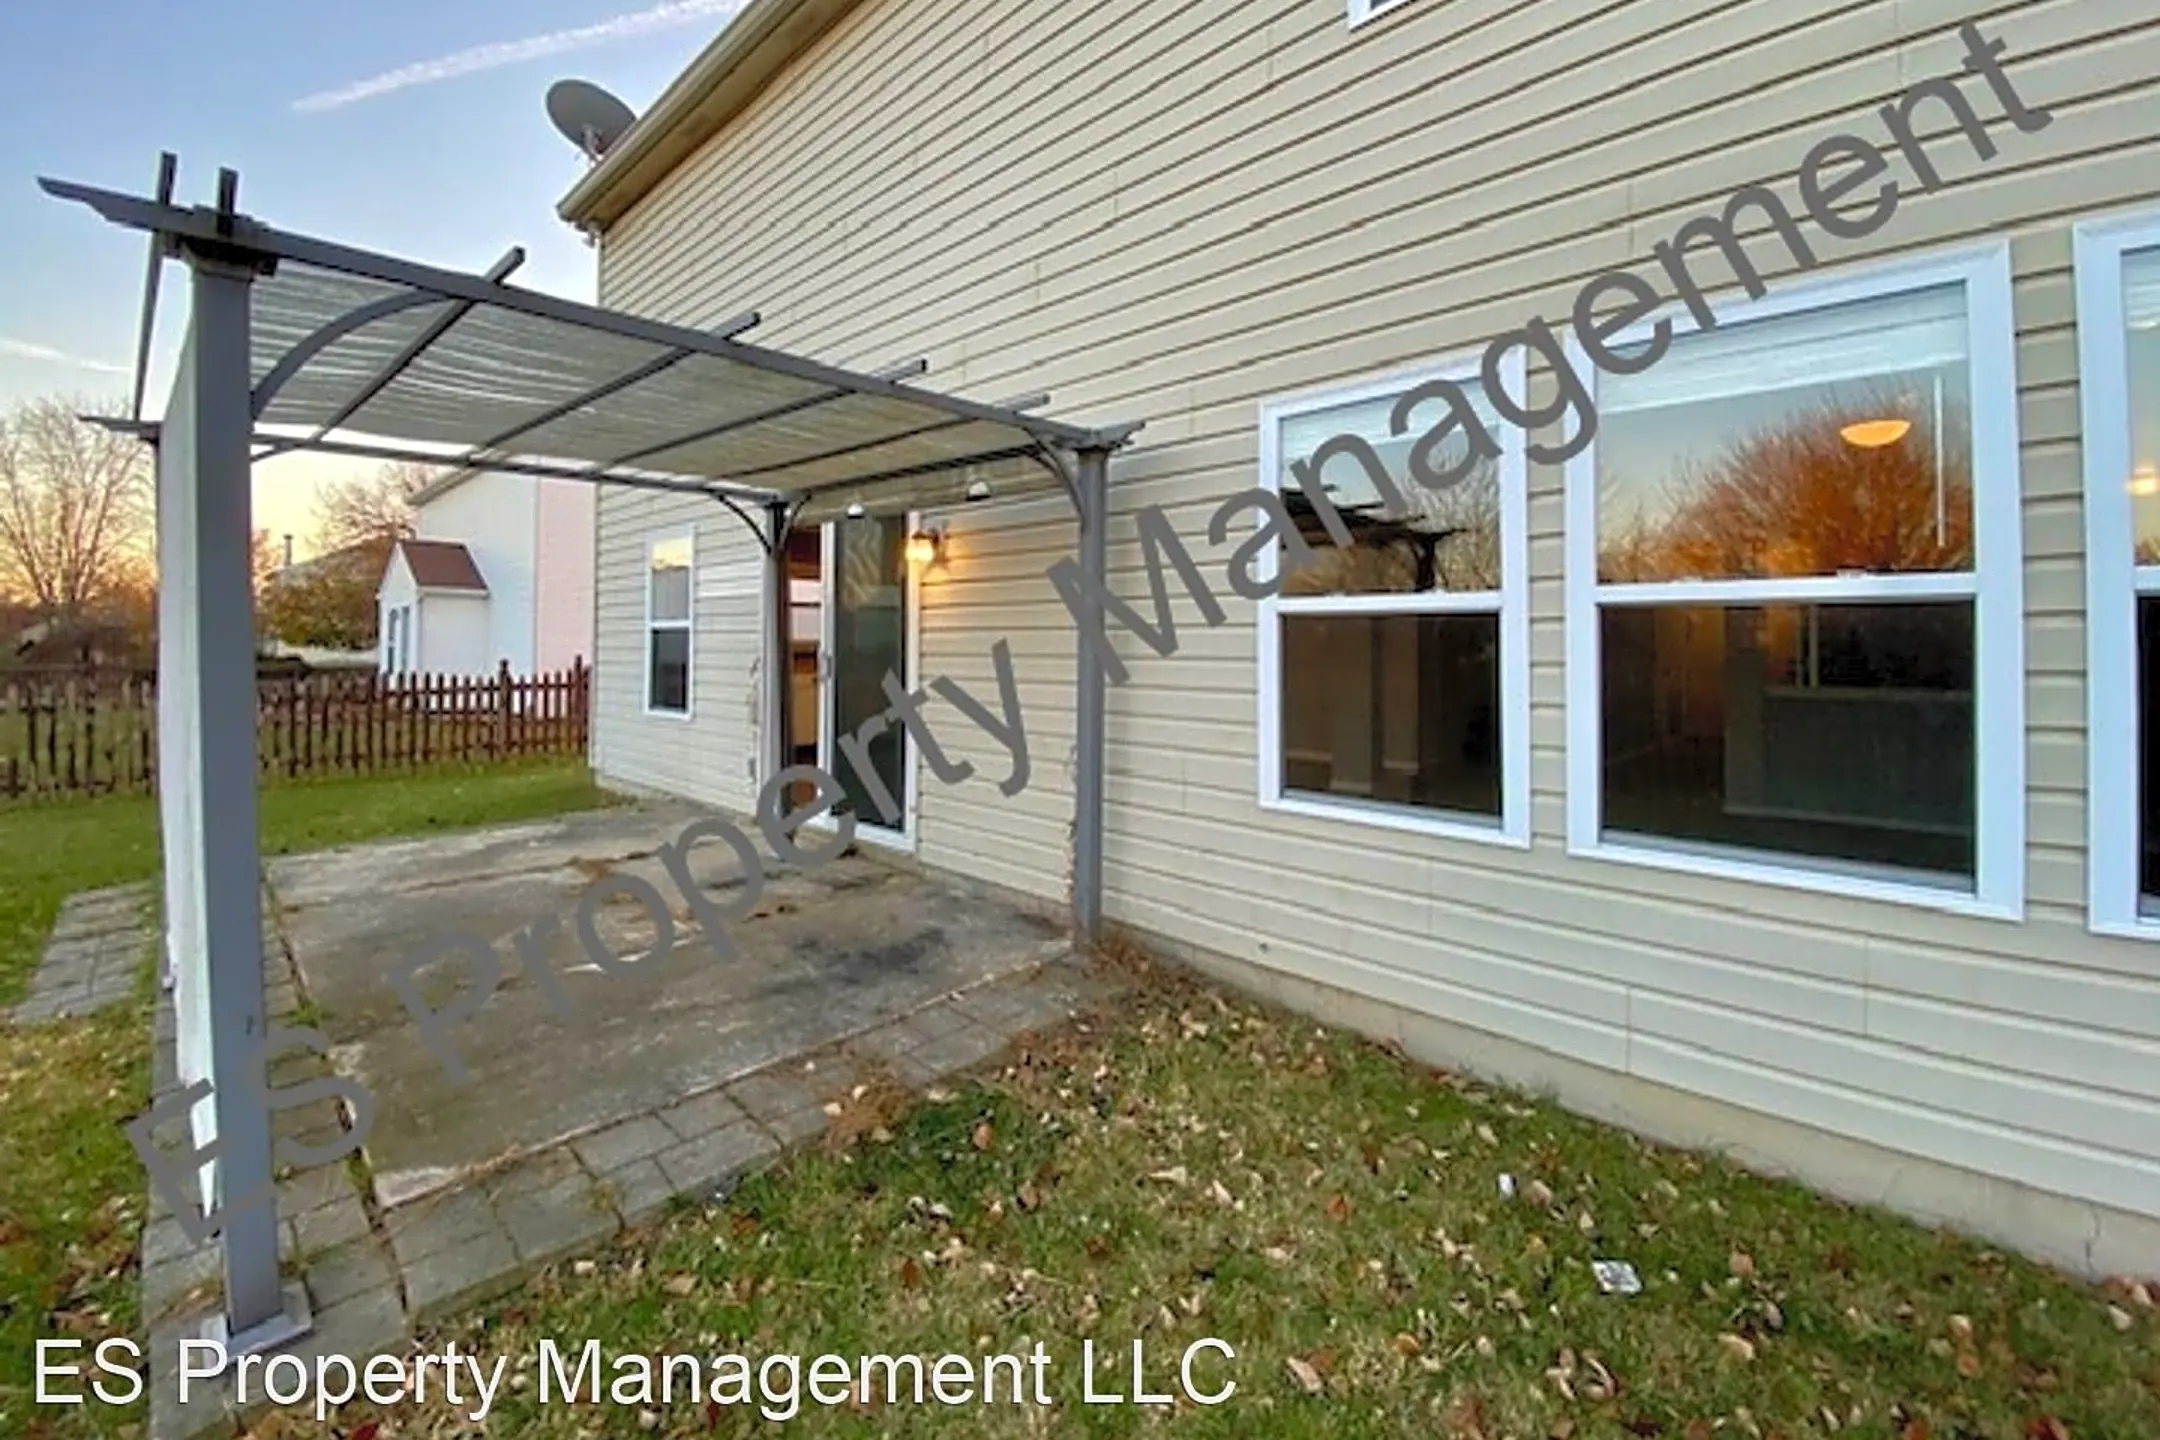 Patio / Deck - 2073 Westmere Dr - Plainfield, IN